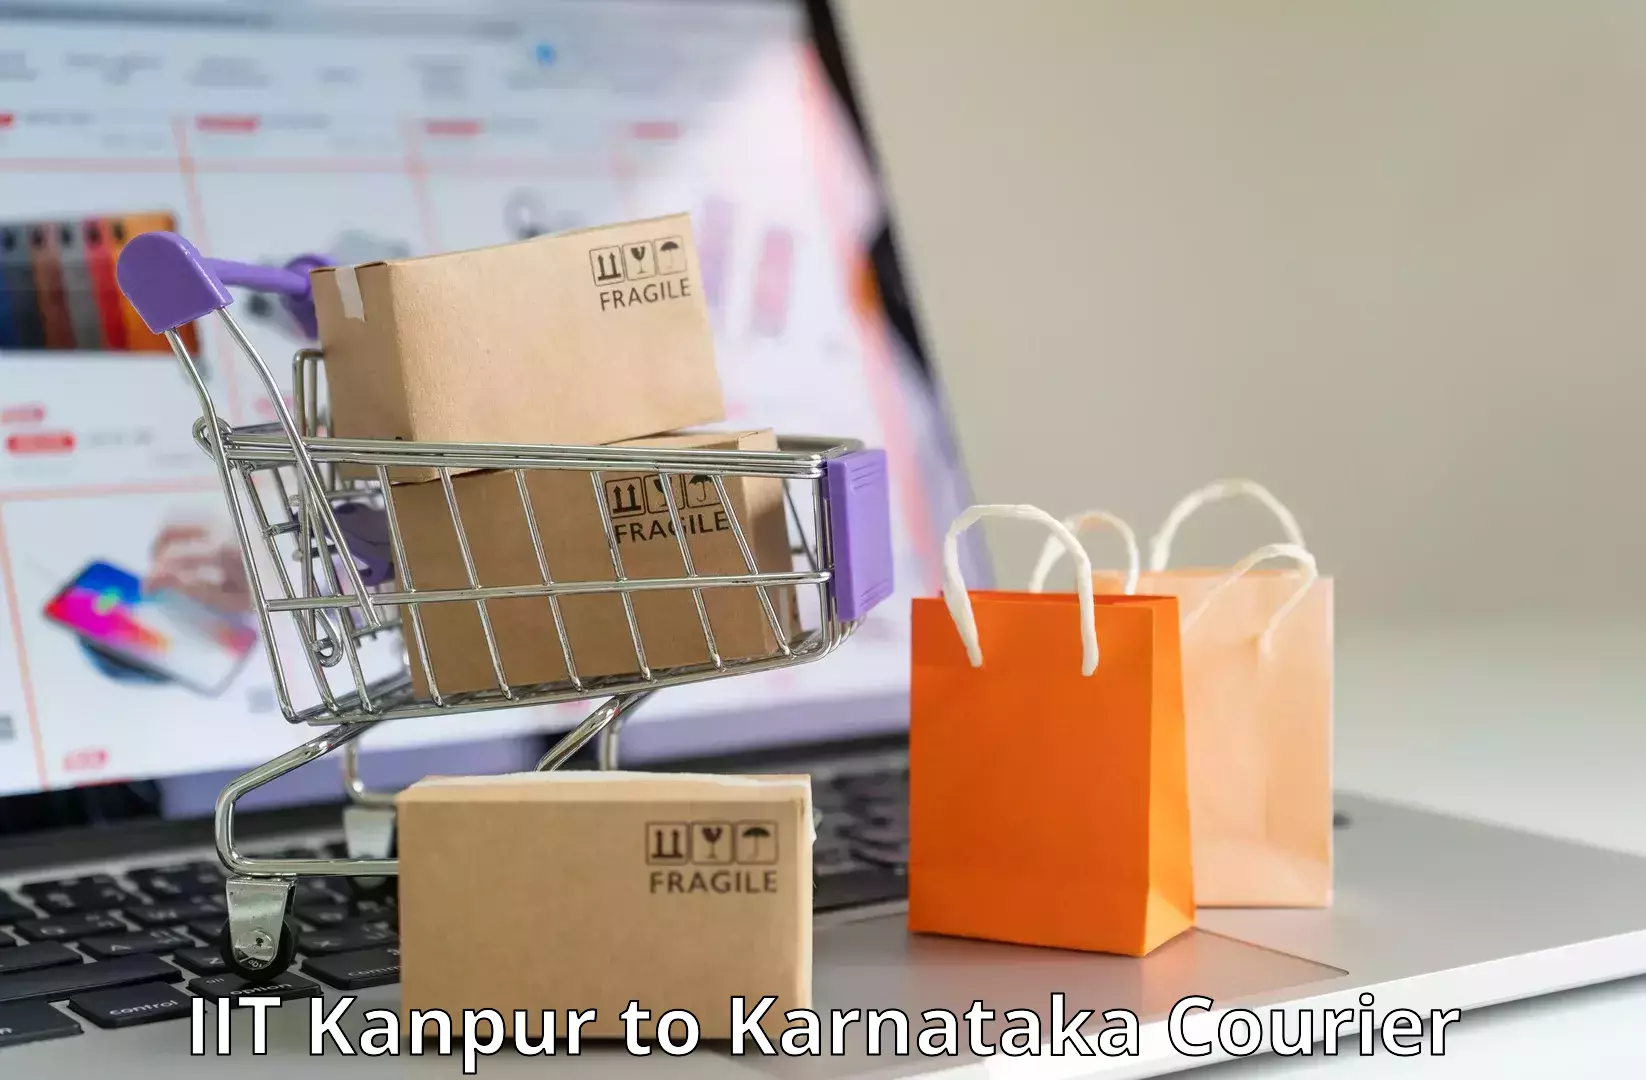 Affordable parcel service IIT Kanpur to Shorapur